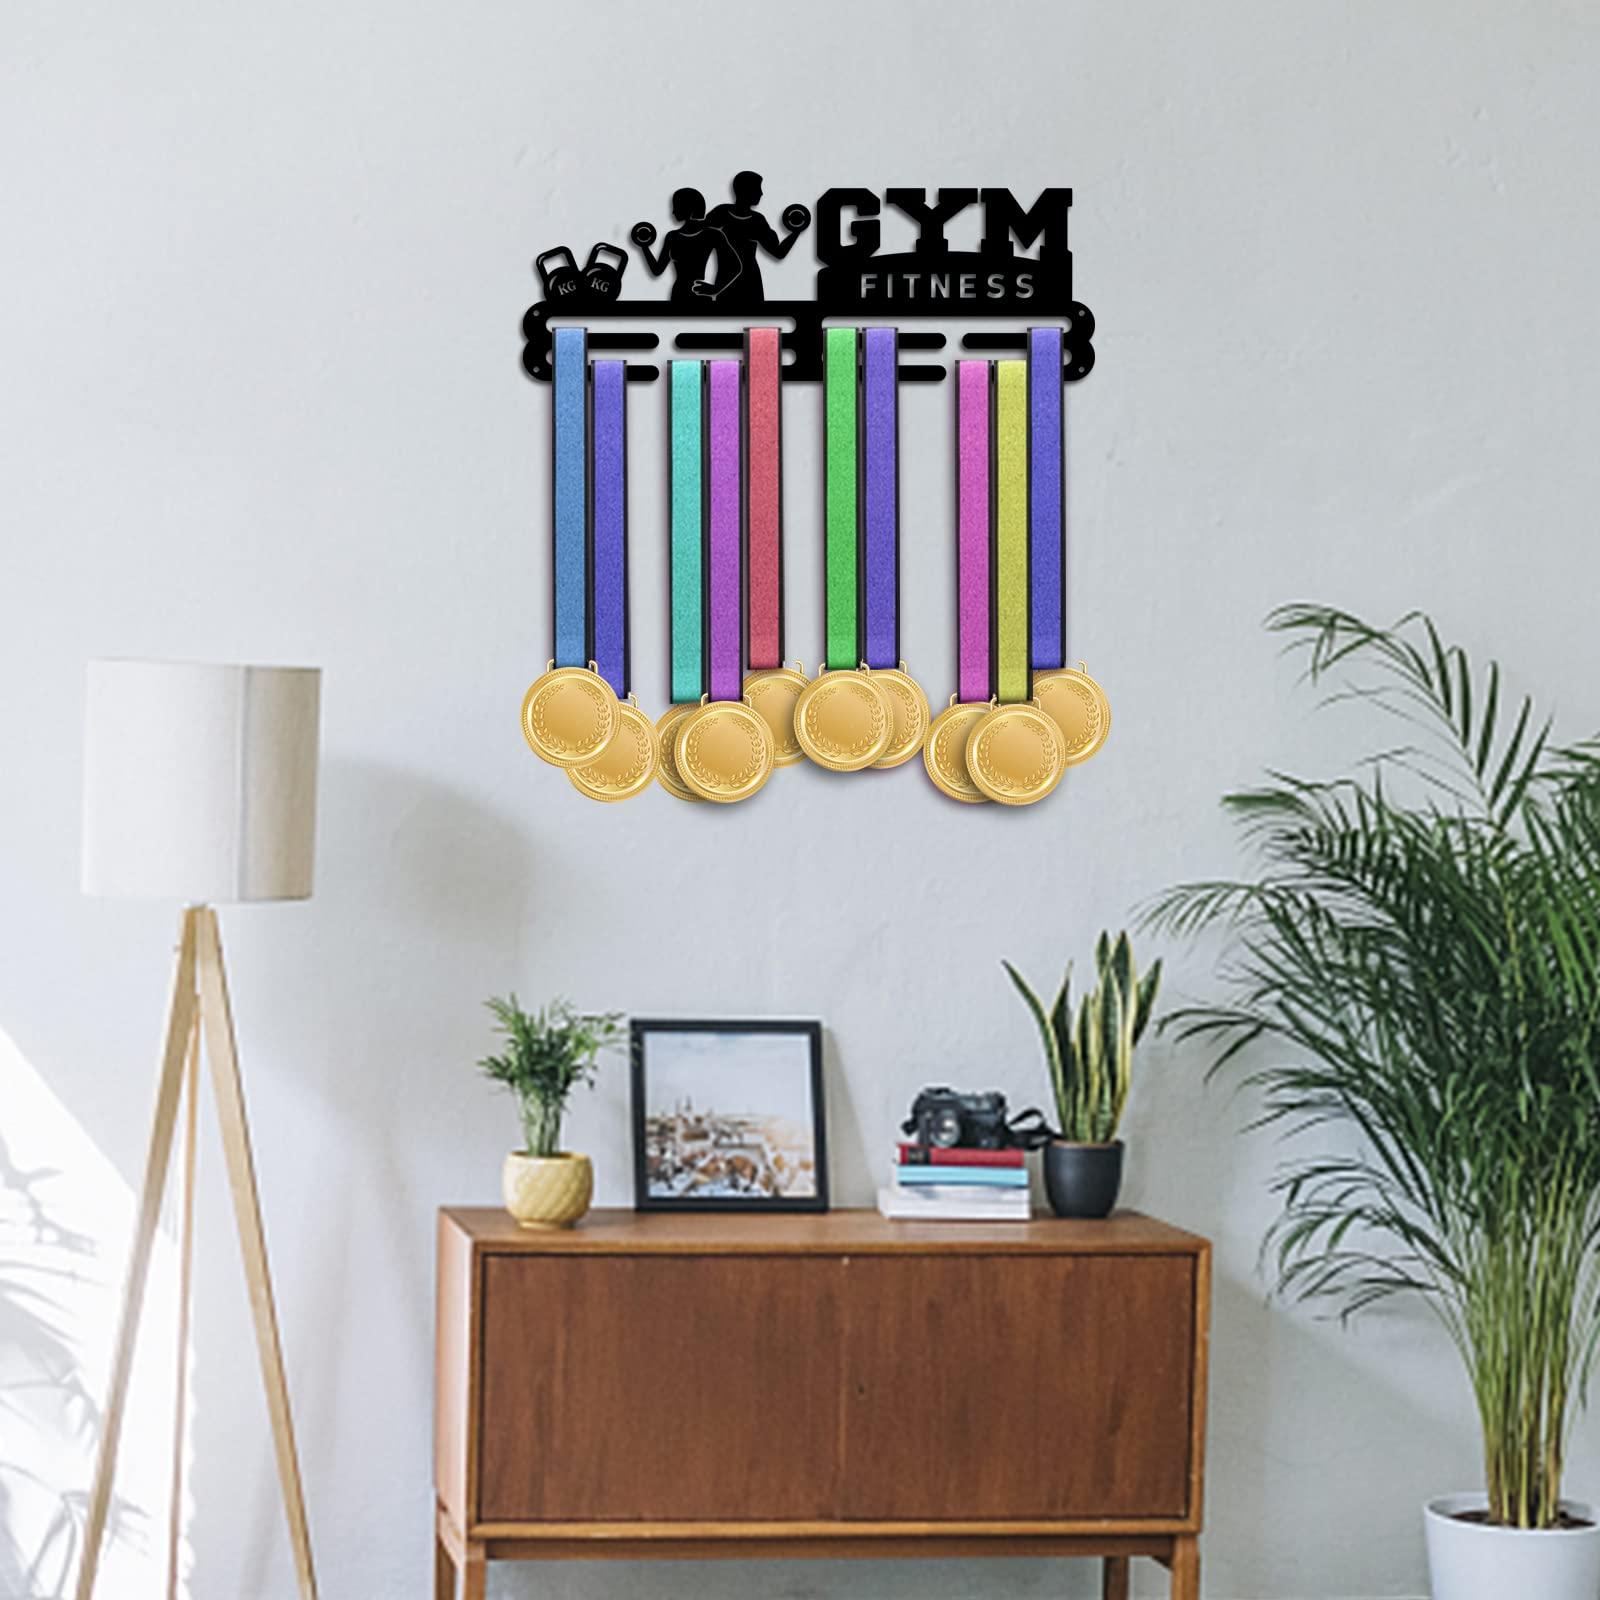 PH PandaHall Fitness Medal Hanger, Award Display Holders 3 Lines Sport Award Rack Wall Mount Iron Frame Celebration Award Ribbon Hanger for over 50 Medals Necklace Jewellery 40x15cm/15.7x5.9inch 4